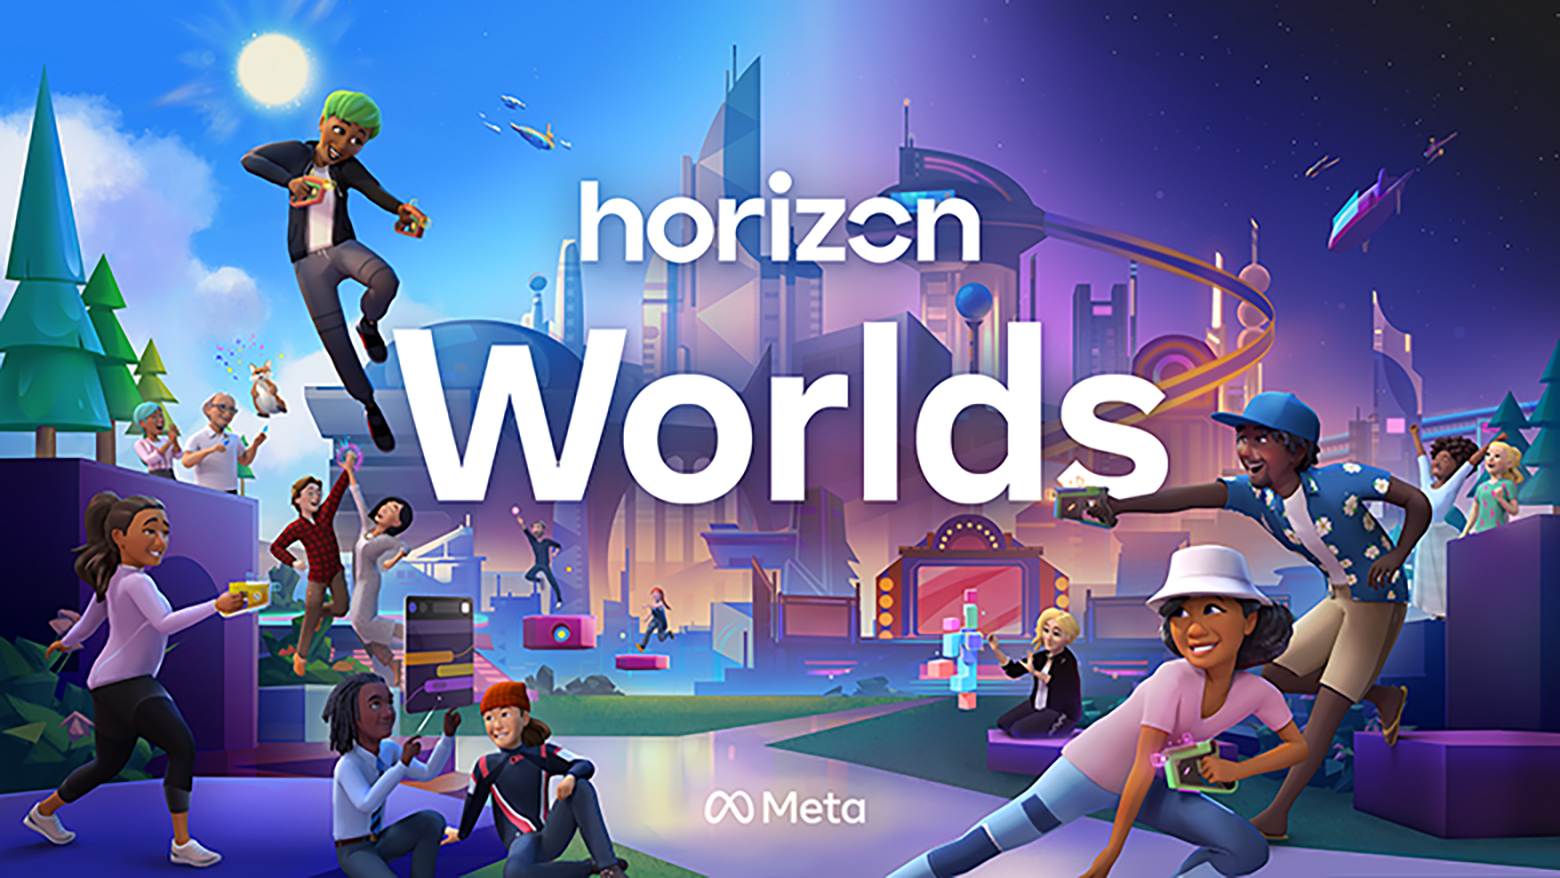 Meta opens up its social VR space Horizon Worlds to teens